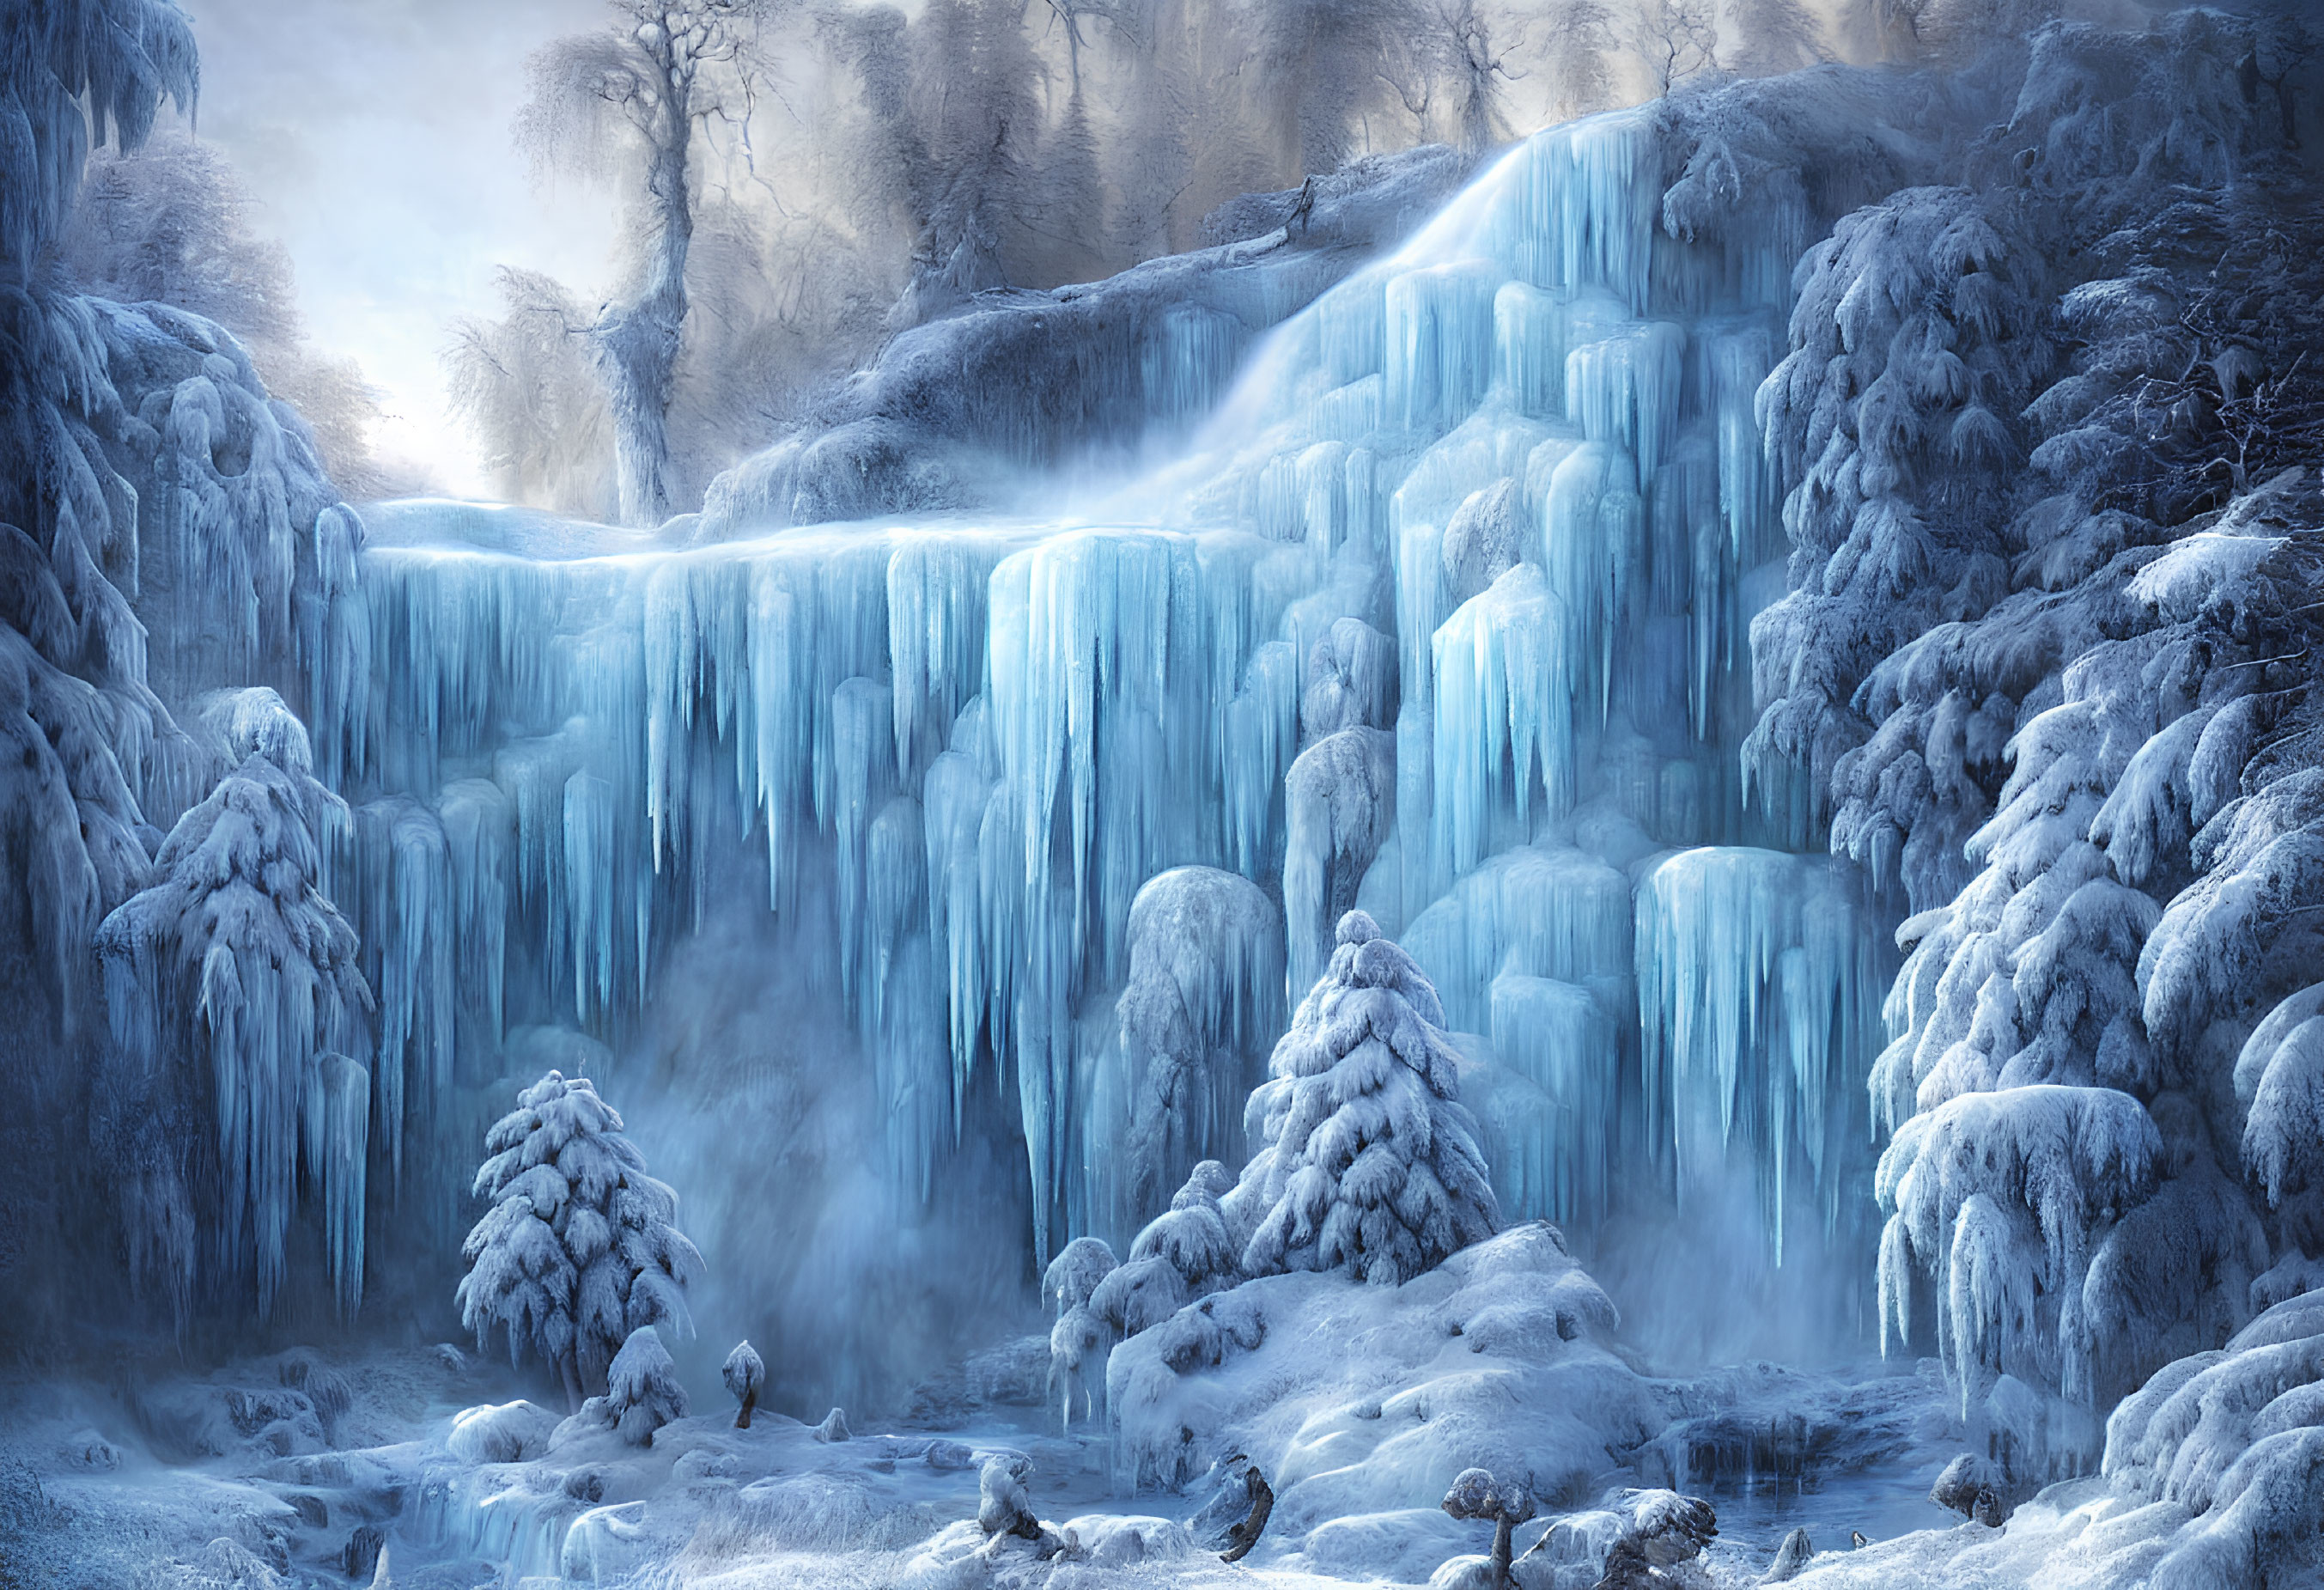 Frozen waterfall and snow-covered trees in serene winter landscape